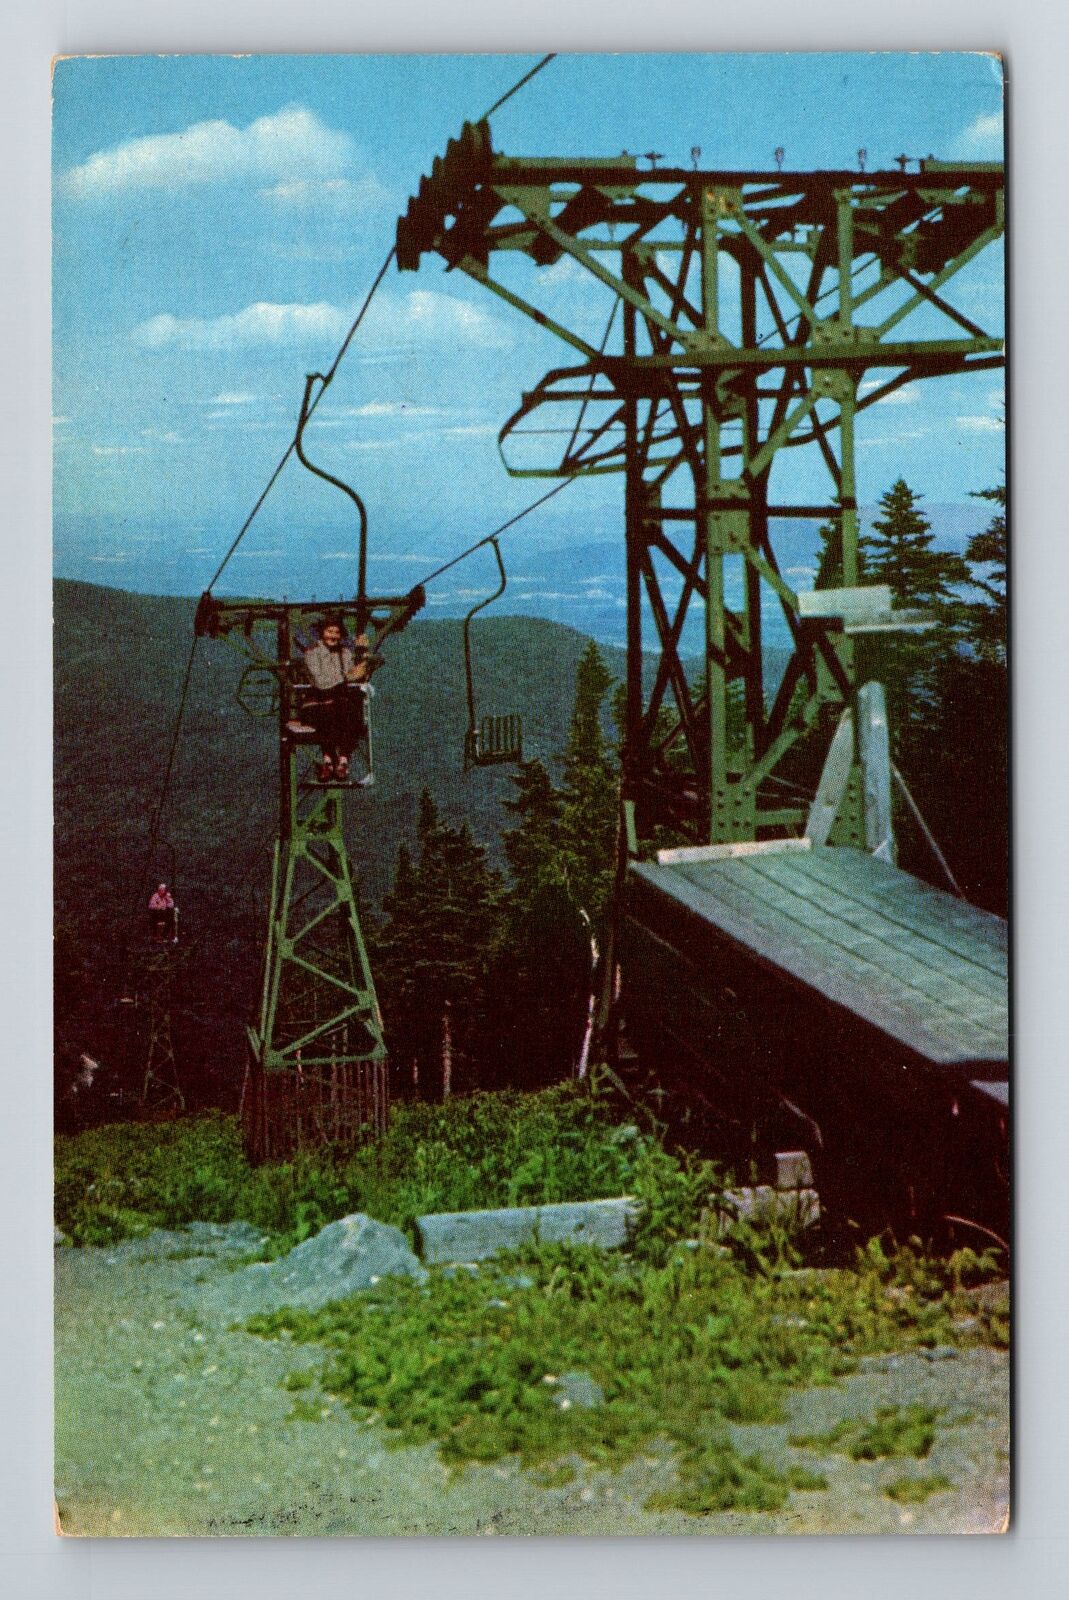 Mt. Mansfield VT-Vermont Ski Area Skylift At The Top Chairlift Vintage Postcard